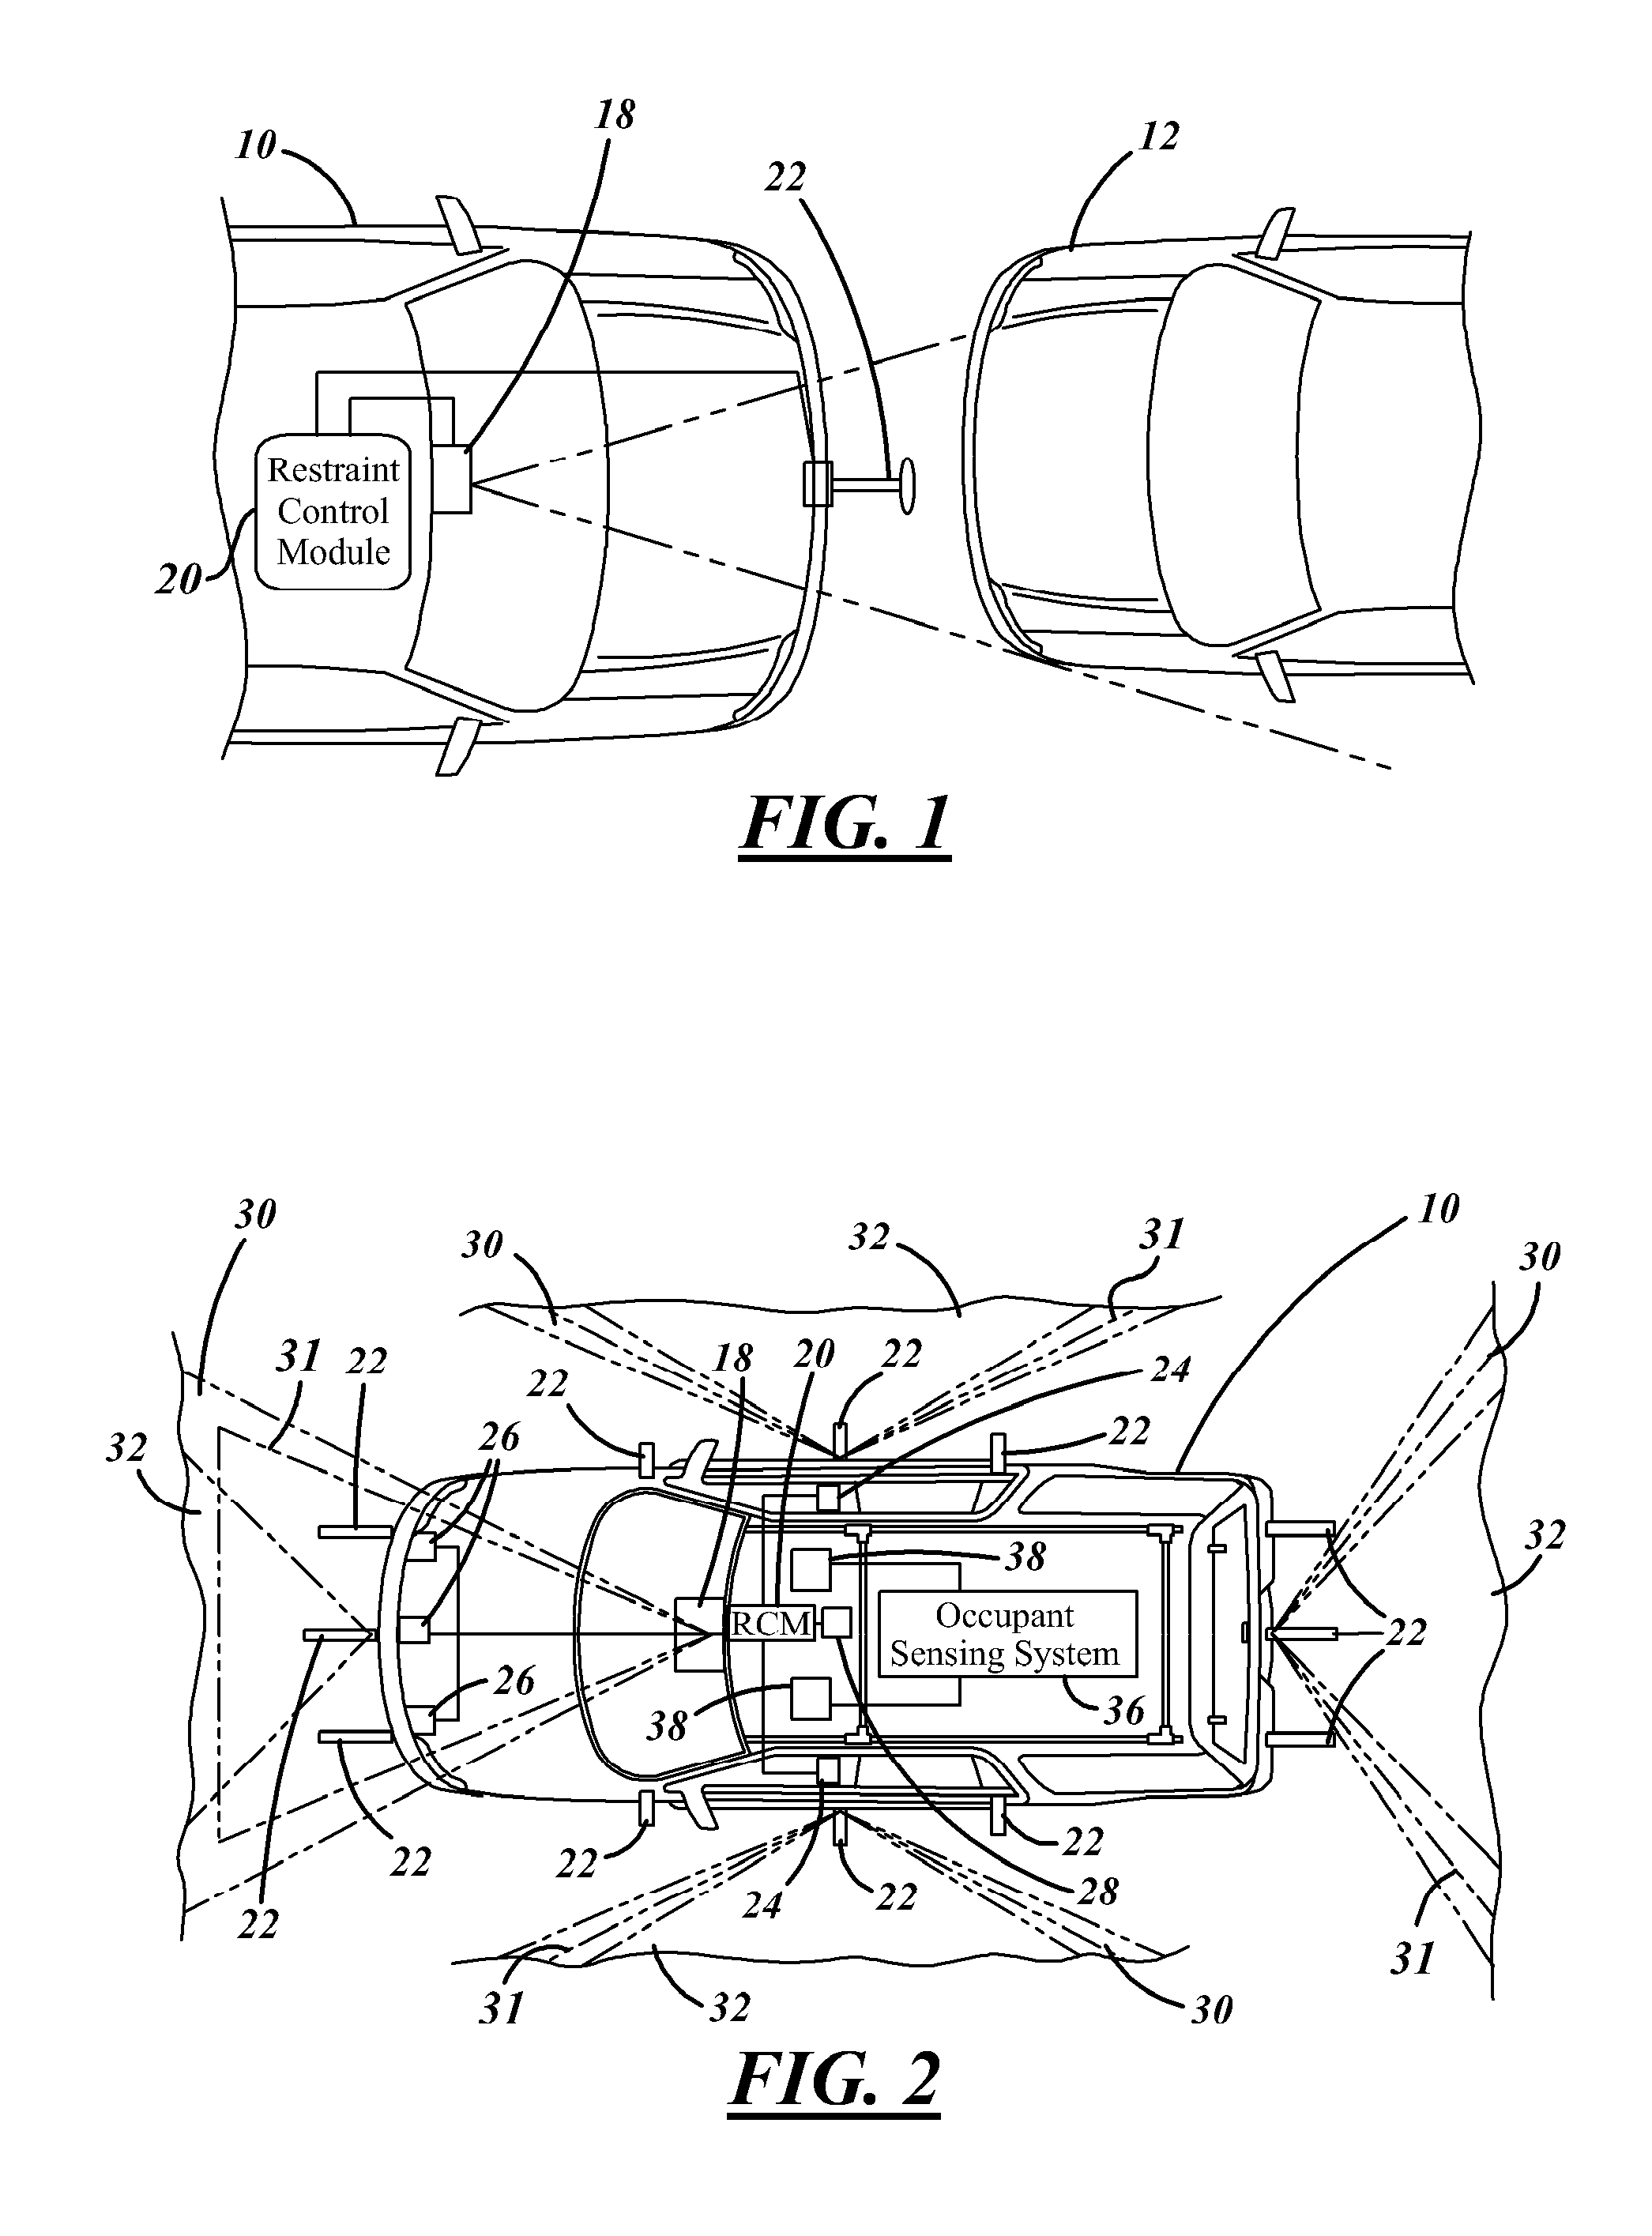 Method for Operating a Pre-Crash Sensing System to Deploy Airbags Using Confidence Factors Prior to Collision